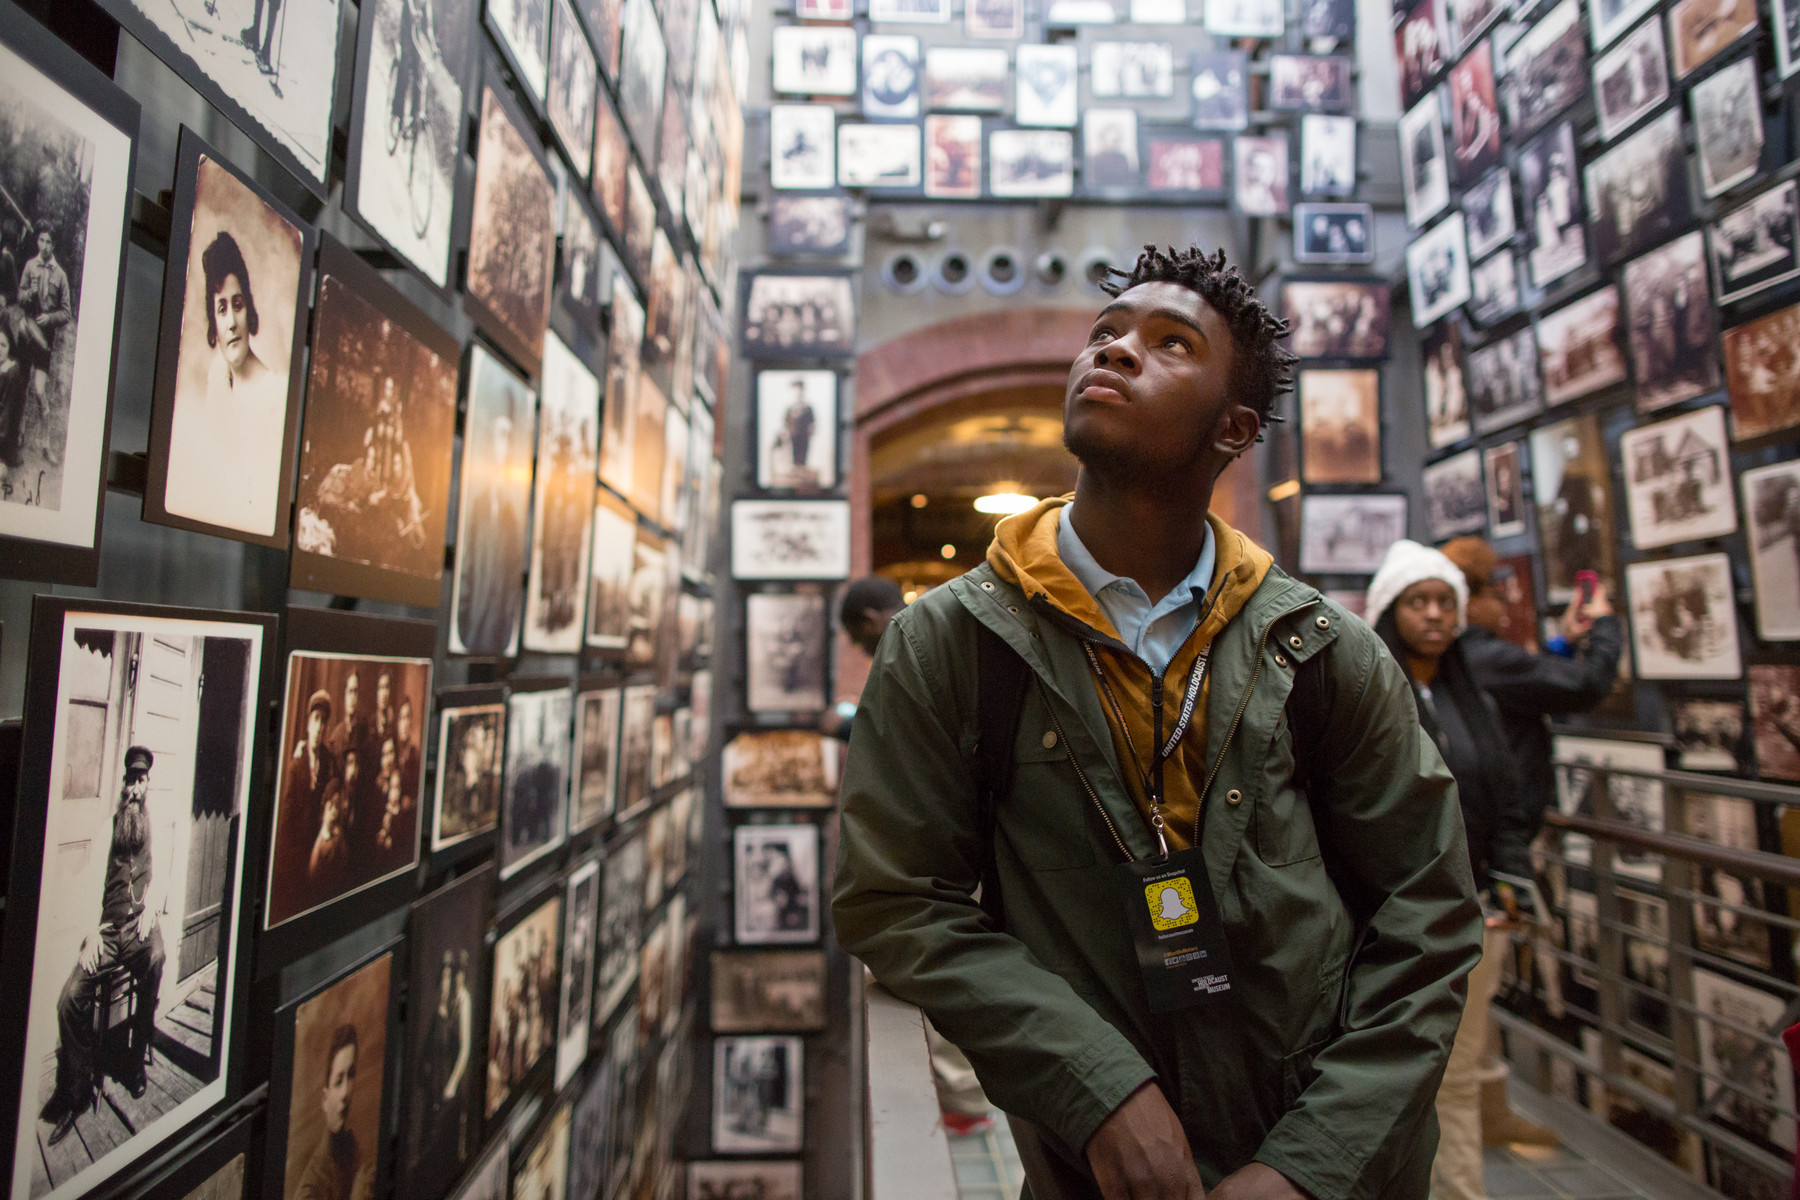 14 December 2016, Students from Anacostia High School tour the Permanent Exhibition.